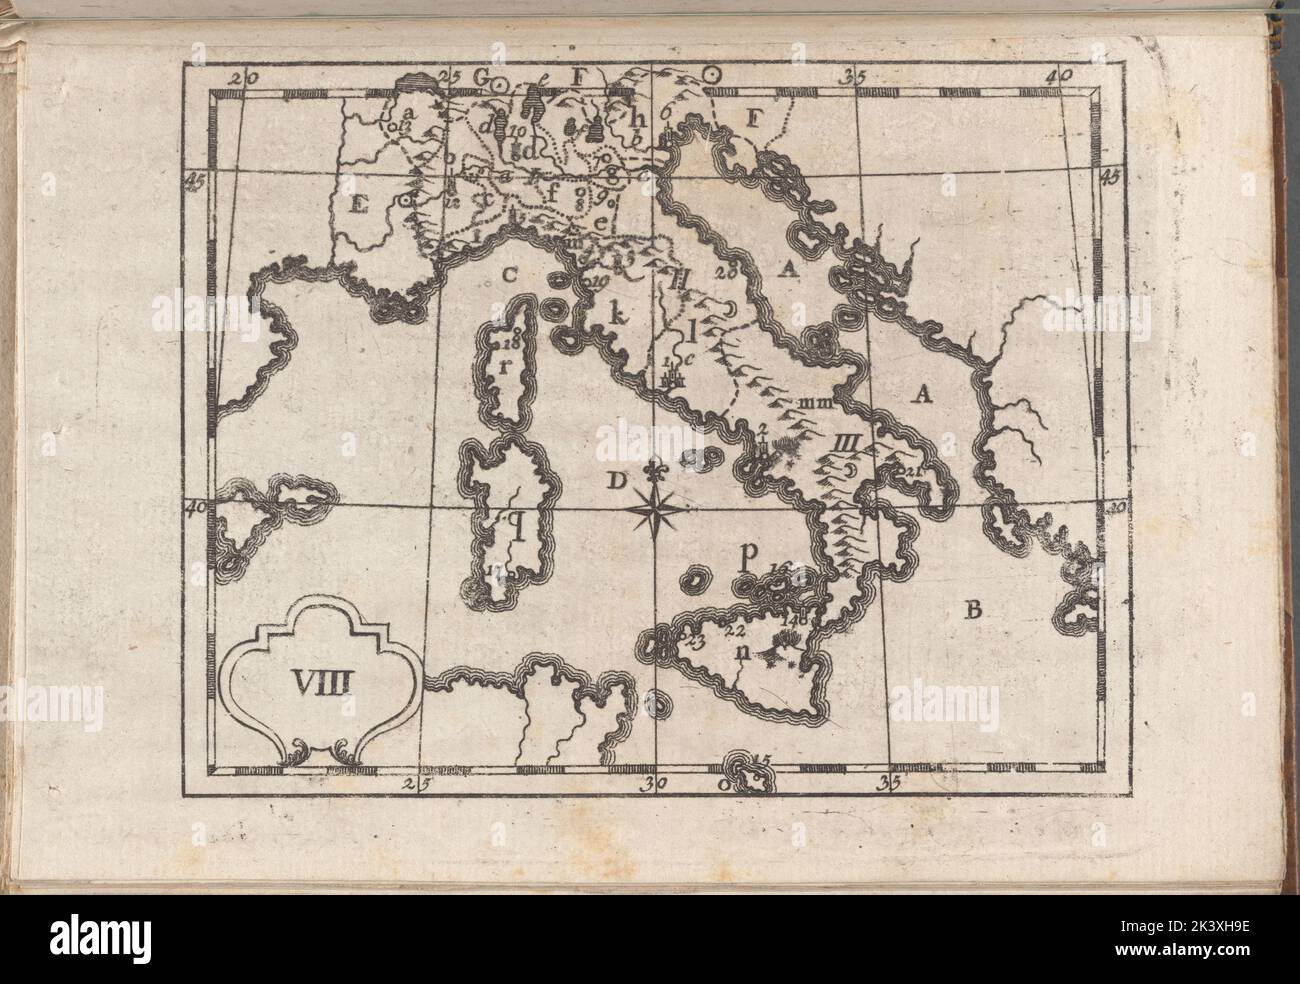 Atlas des enfans..., VIII Dilthey, Philipp Heinrich, 1723-1781. Cartographic. Maps. 1768. Rare Book Division. Geography Stock Photo